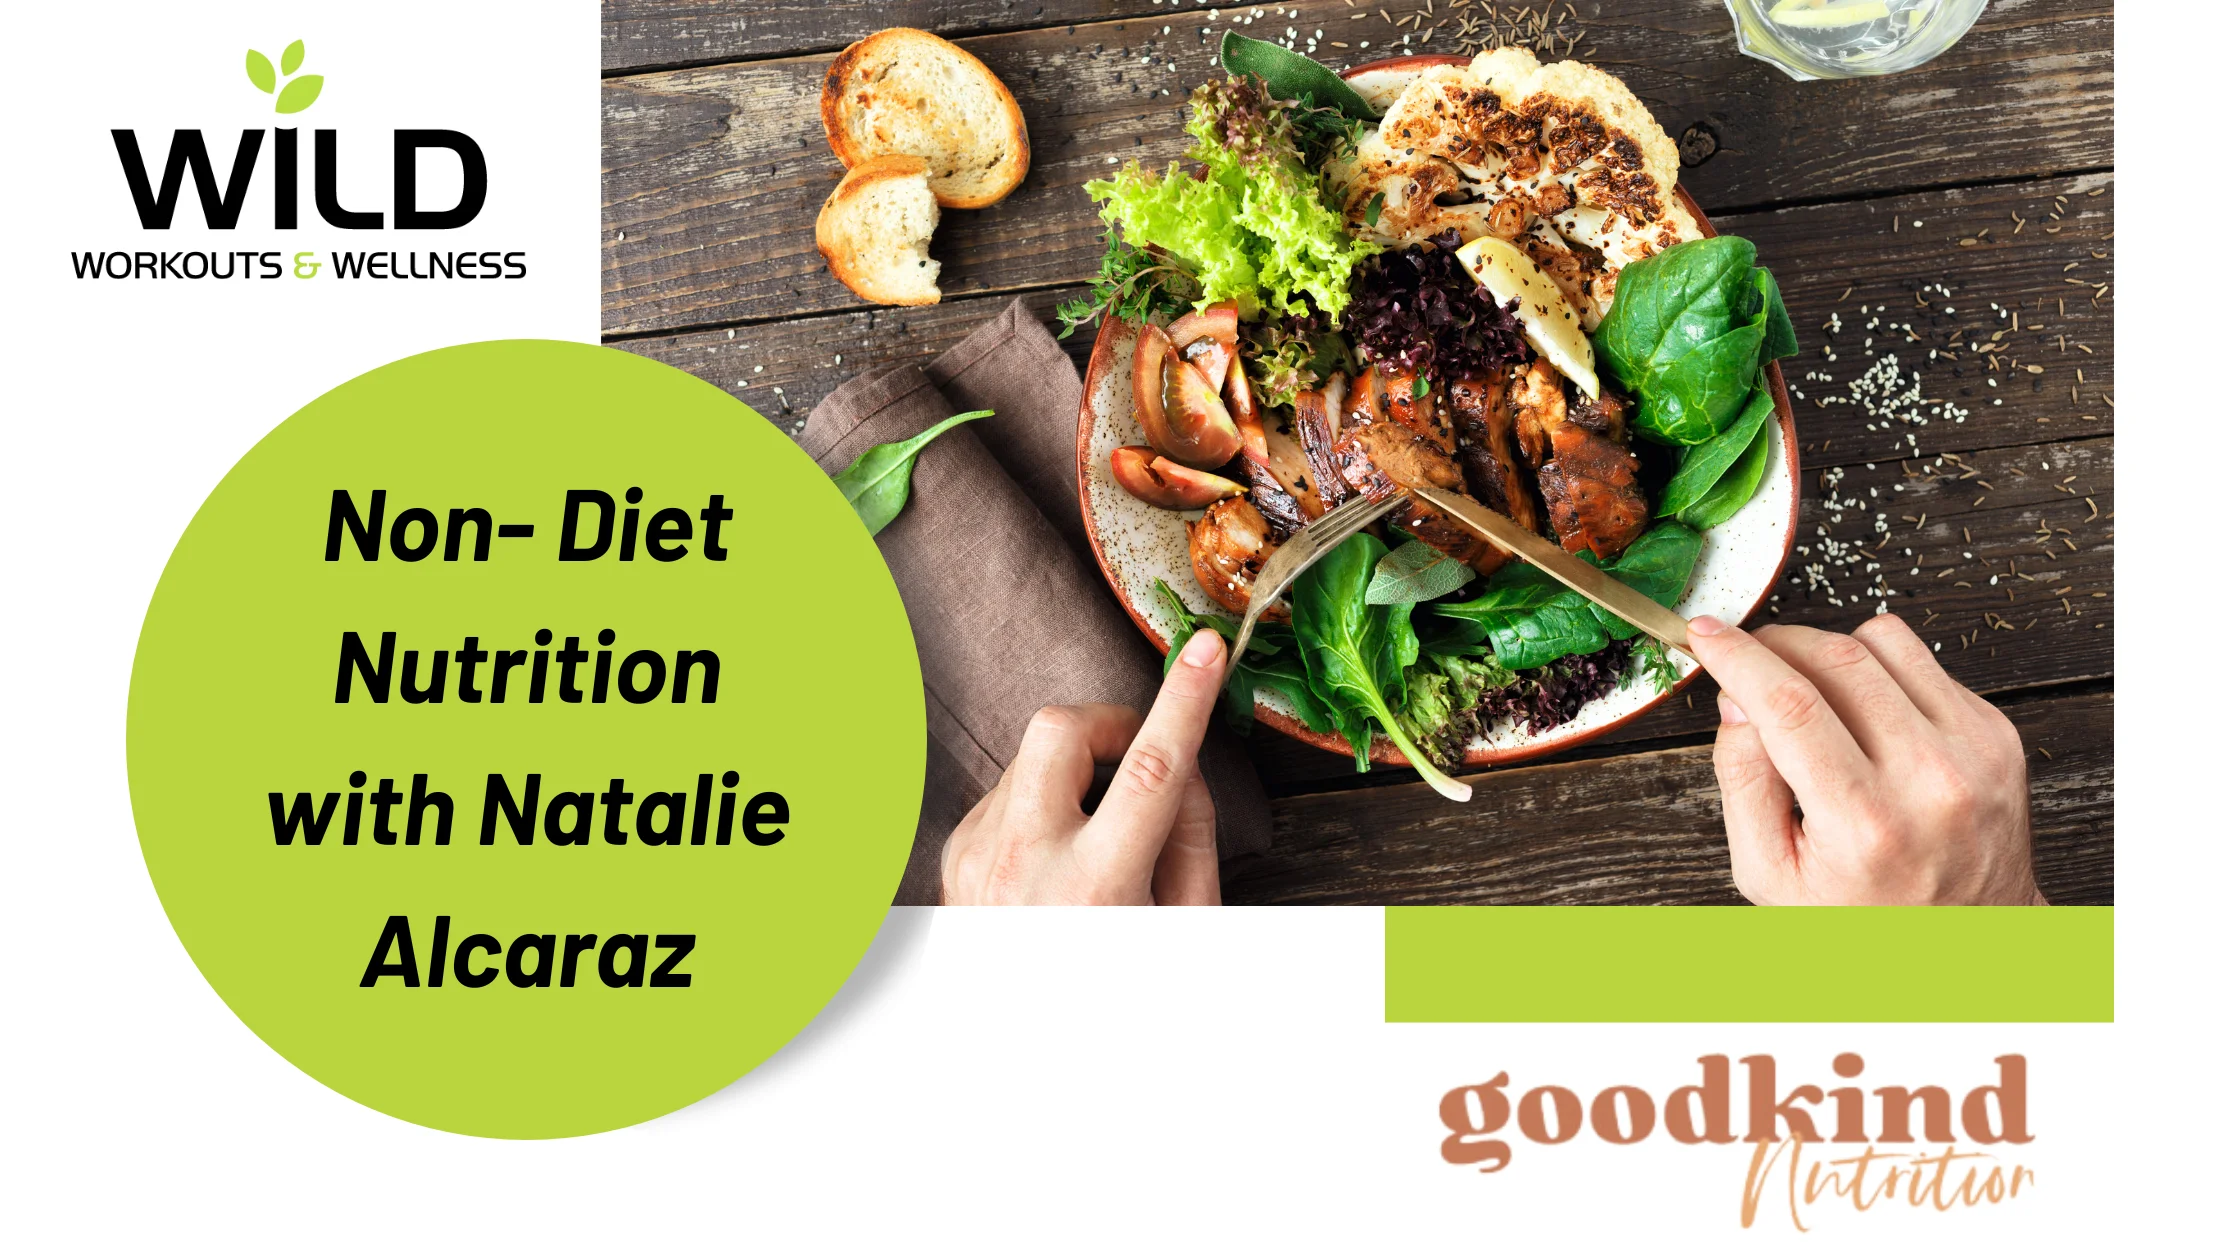 FREE Non-Diet Nutrition Introduction with Goodkind Nutrition’s Natalie Alcaraz